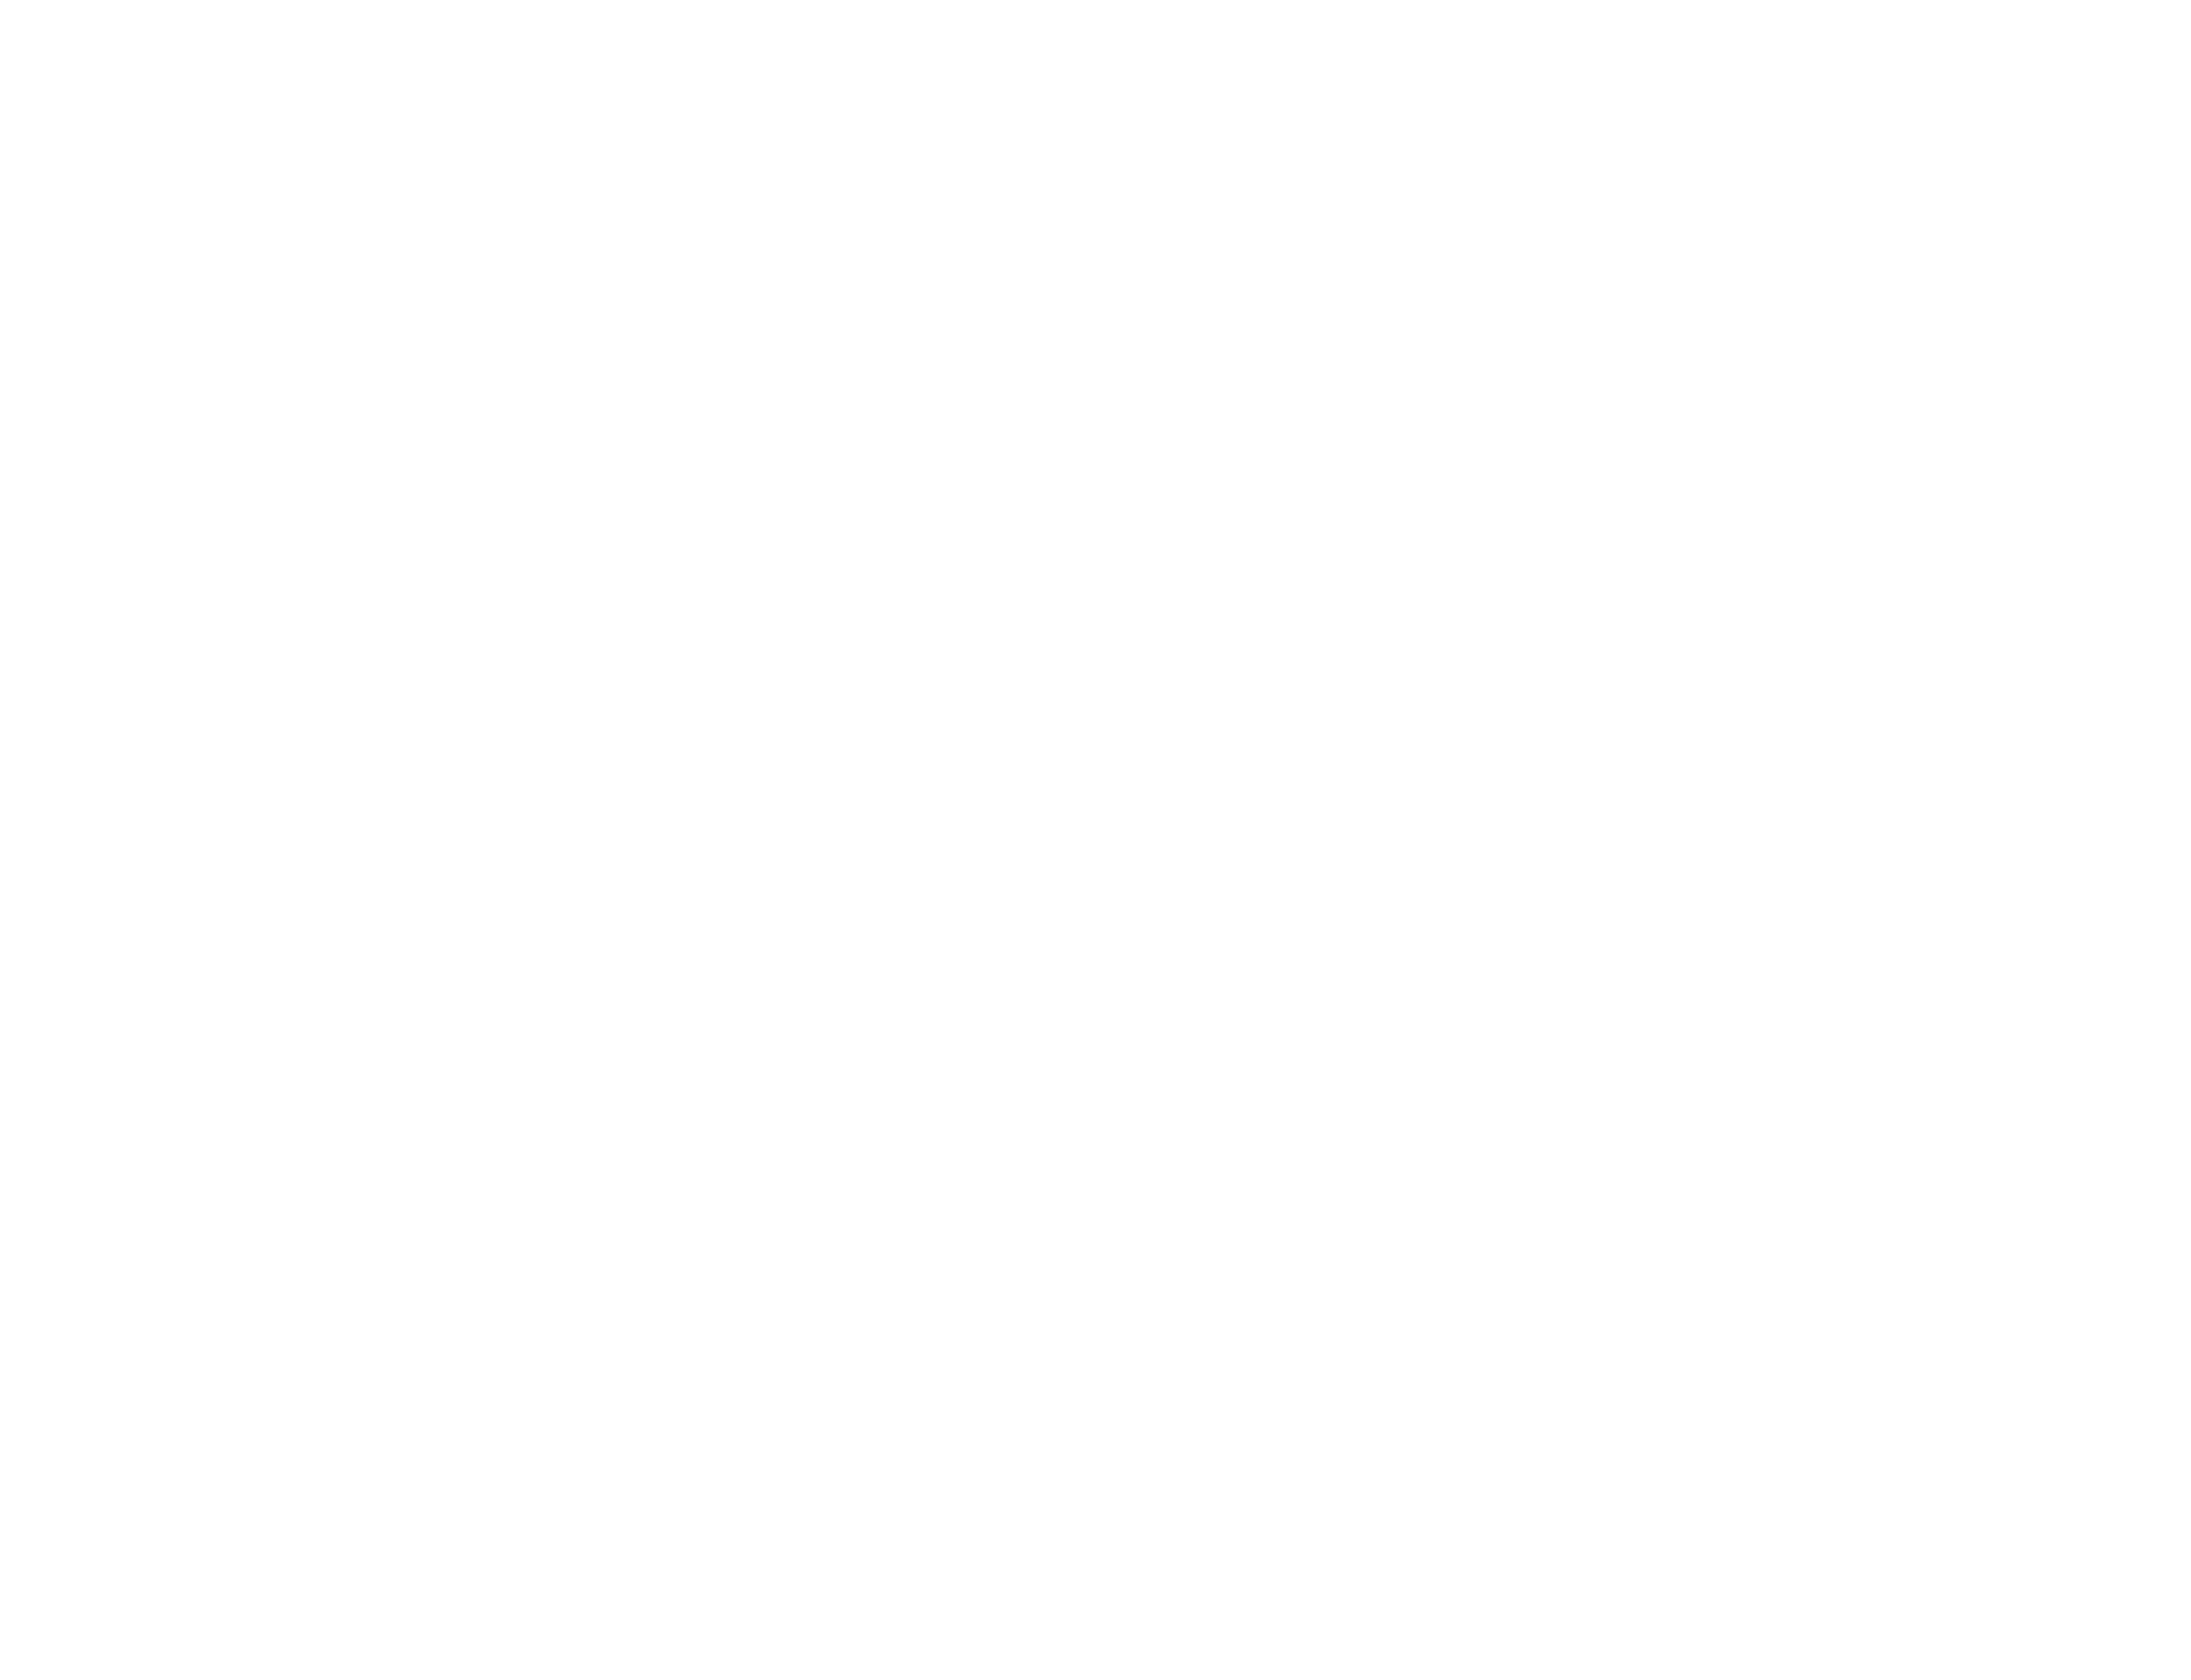 VYACHTS